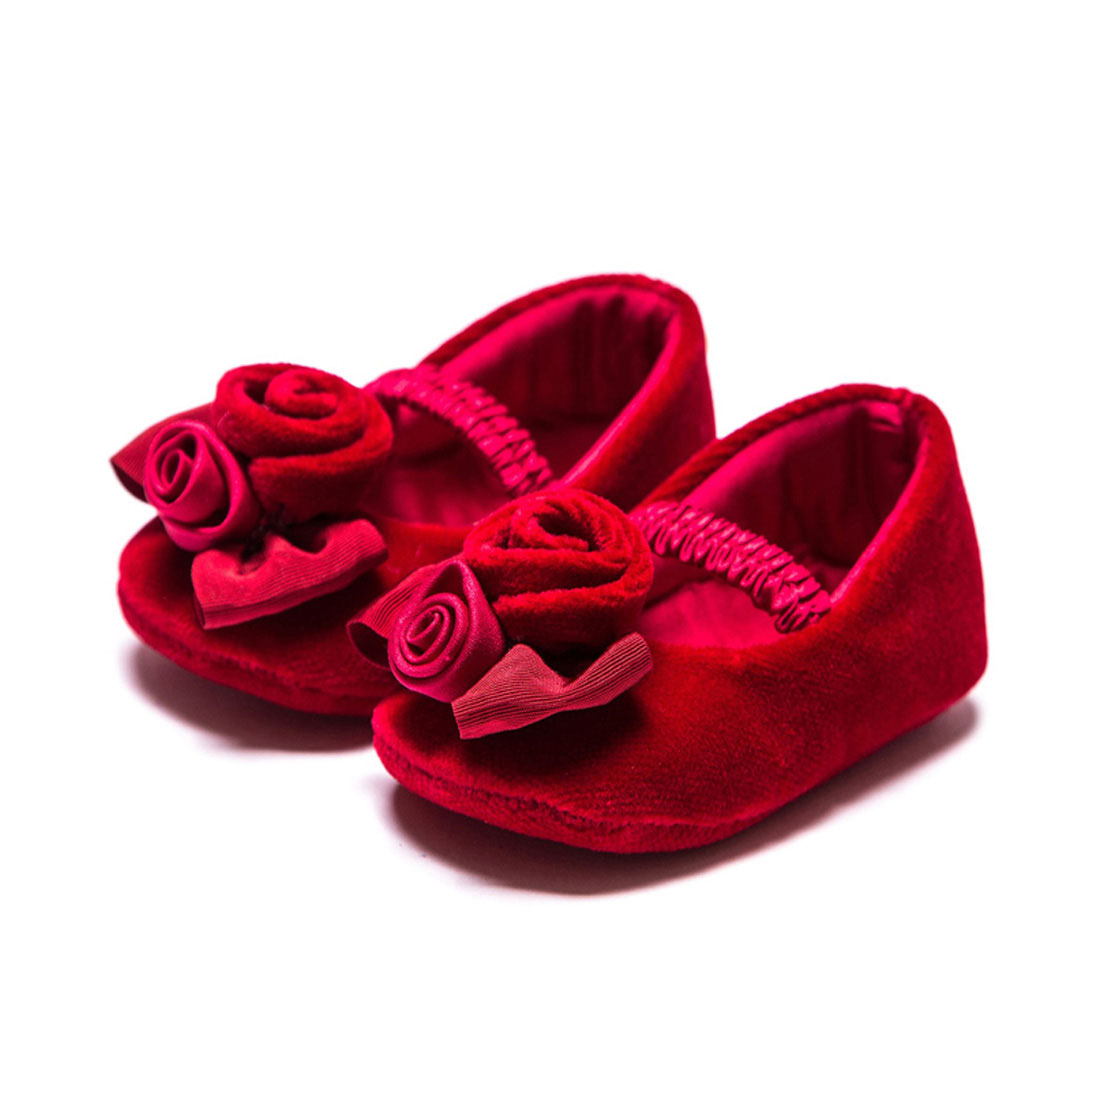 2017 baby red rose girl soft-soled flat shoes baby toddler shoes YH1143